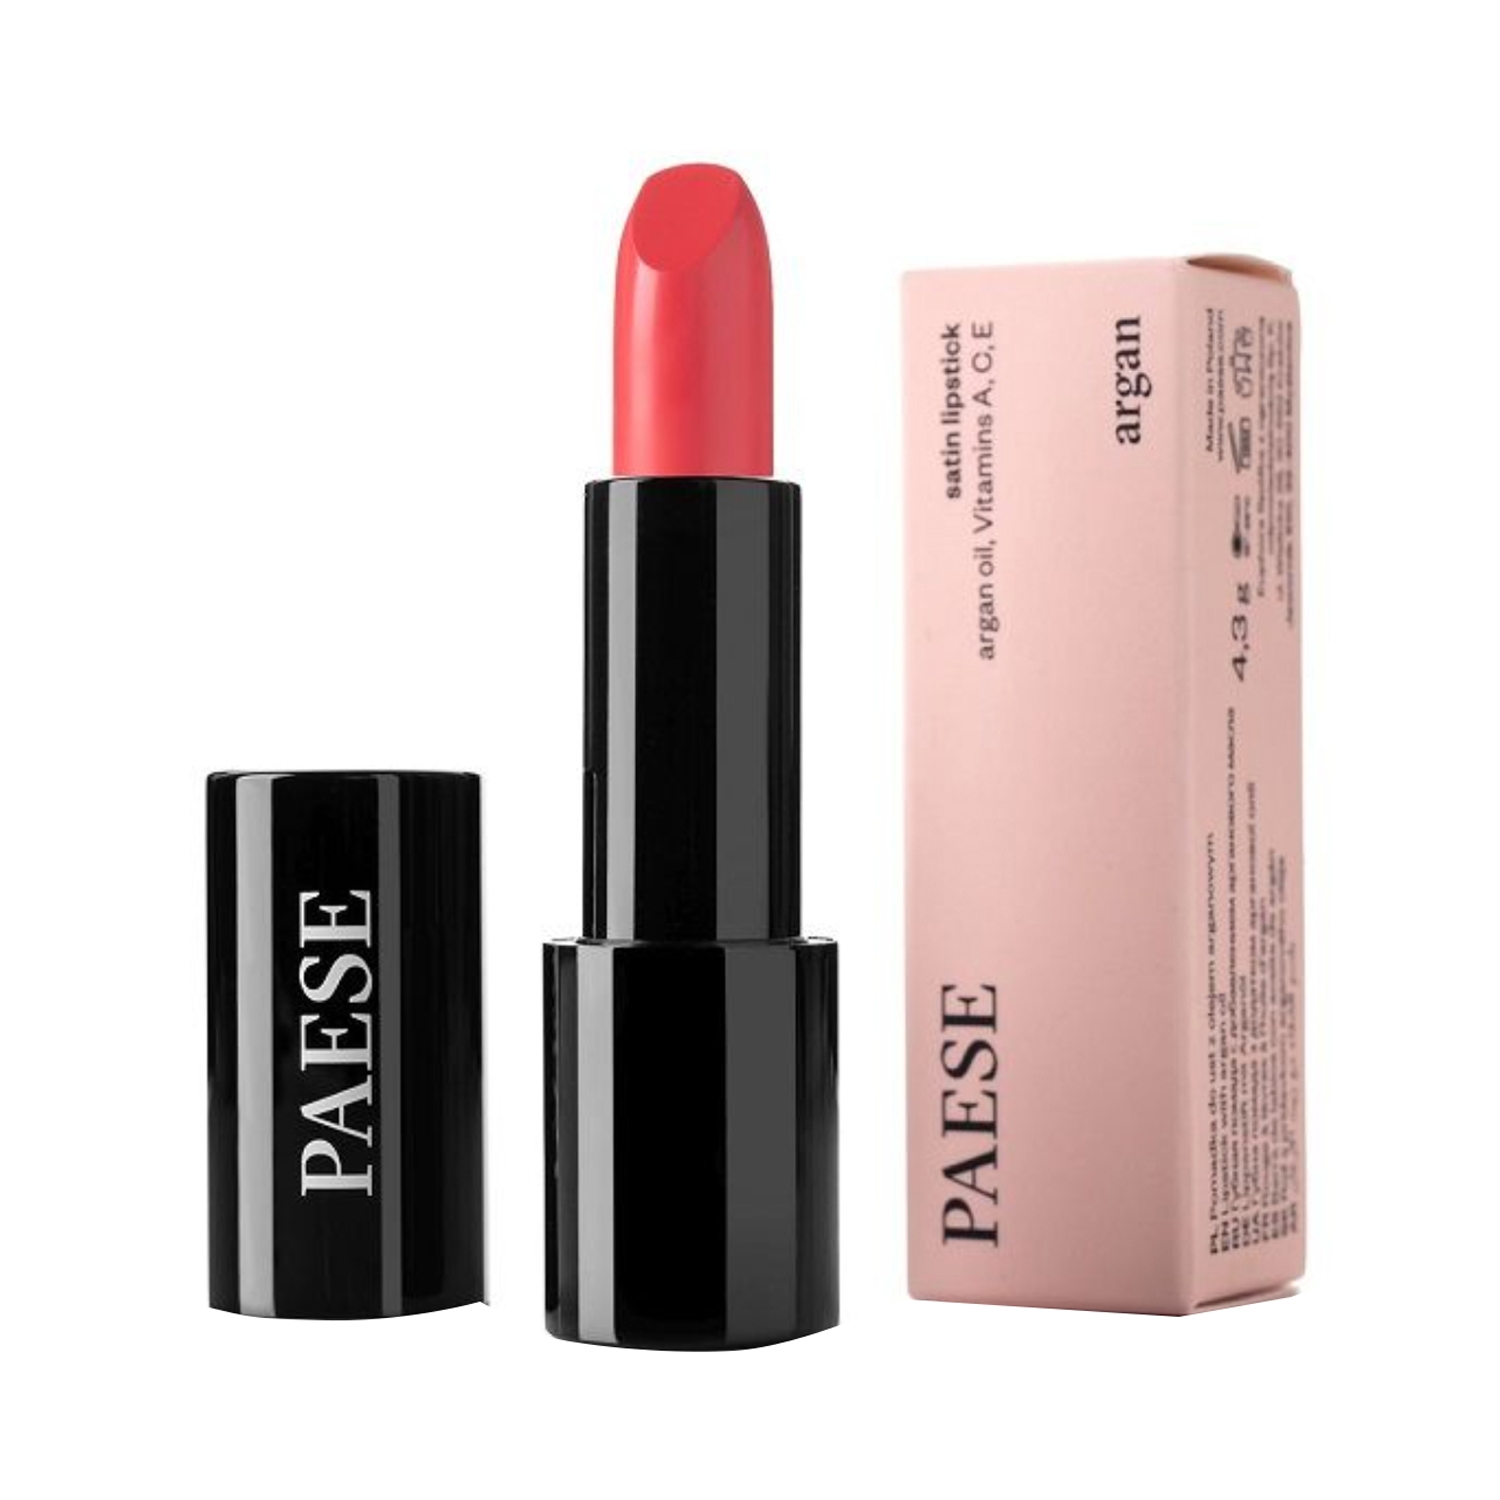 Paese Cosmetics | Paese Cosmetics Lipstick with Argan Oil - 72 Pink (4.3g)